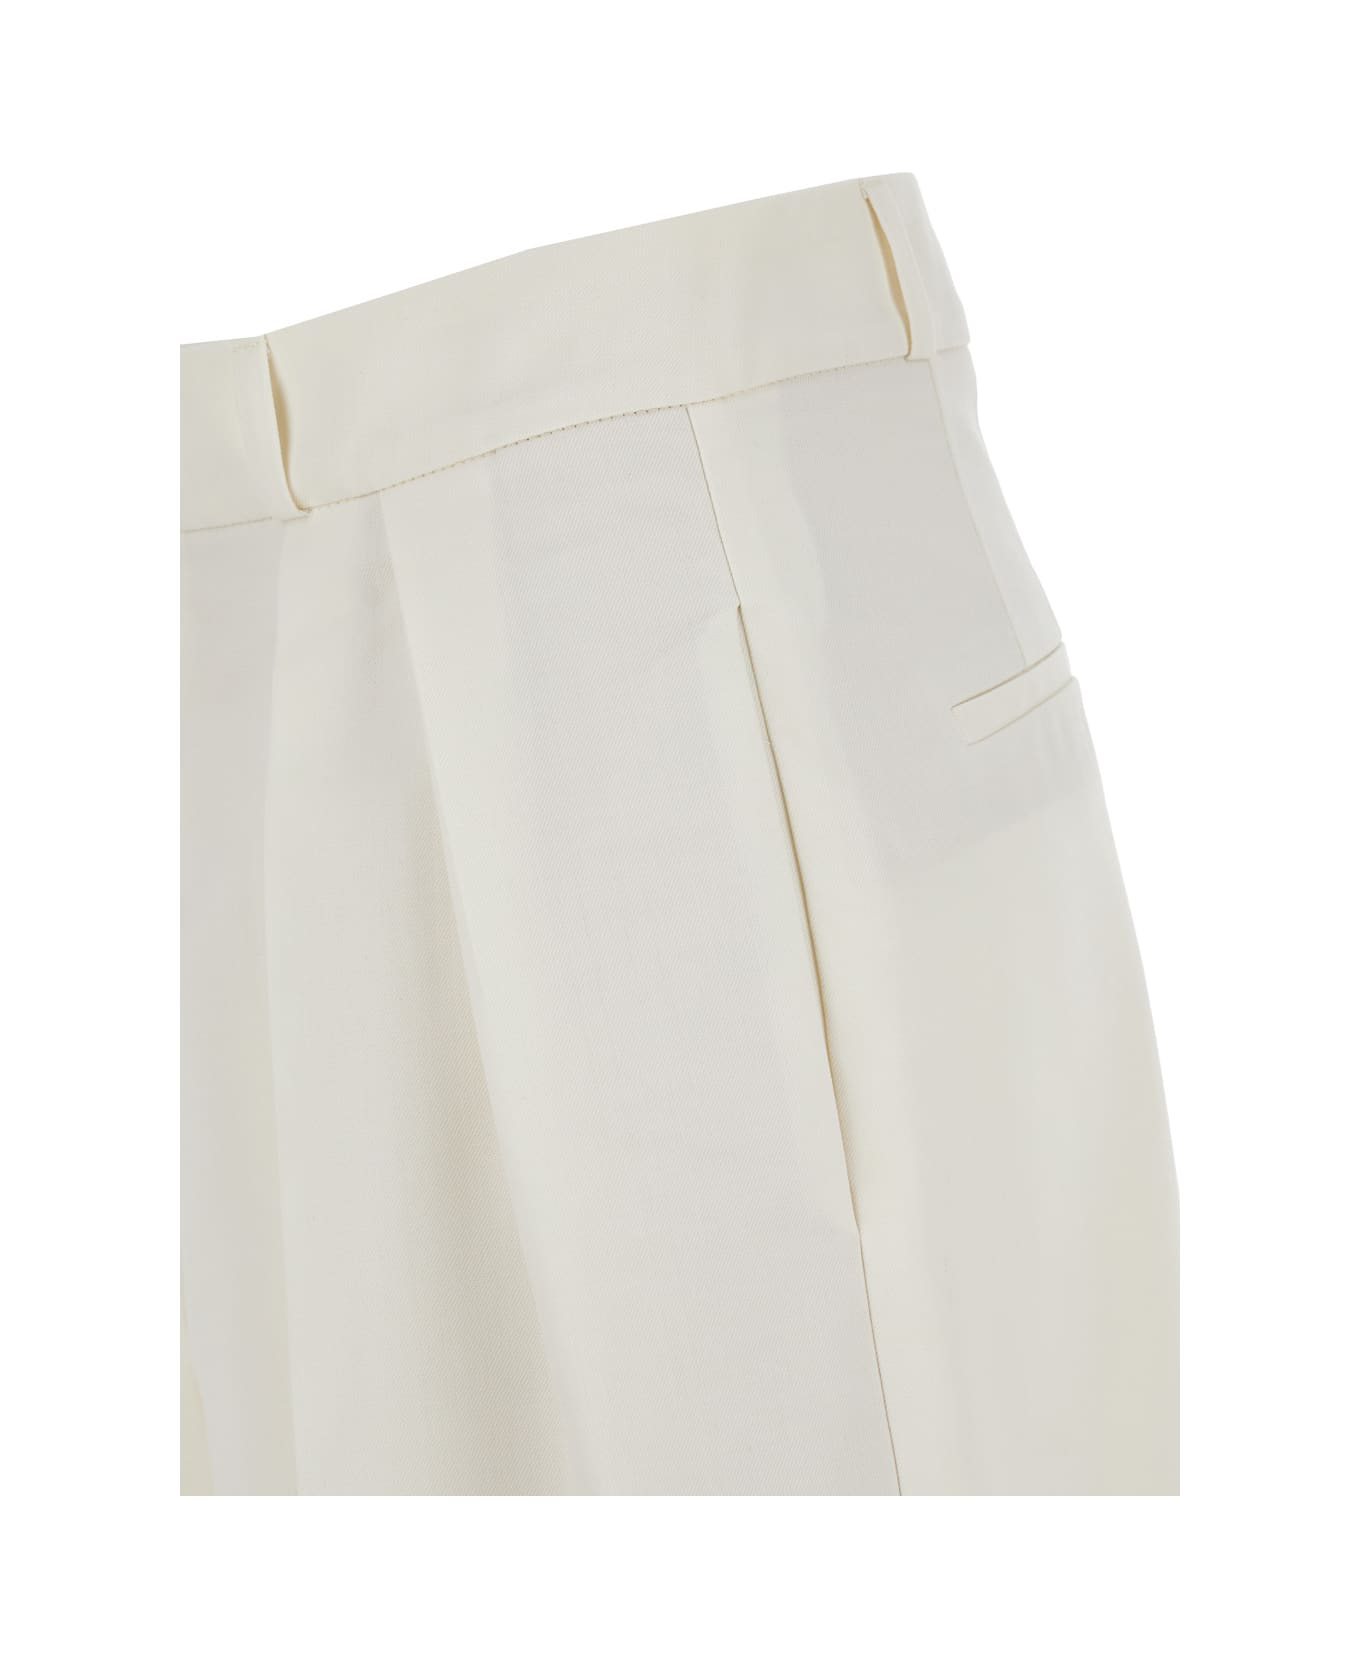 Róhe White Tailored Shorts In Wool Woman - White ボトムス